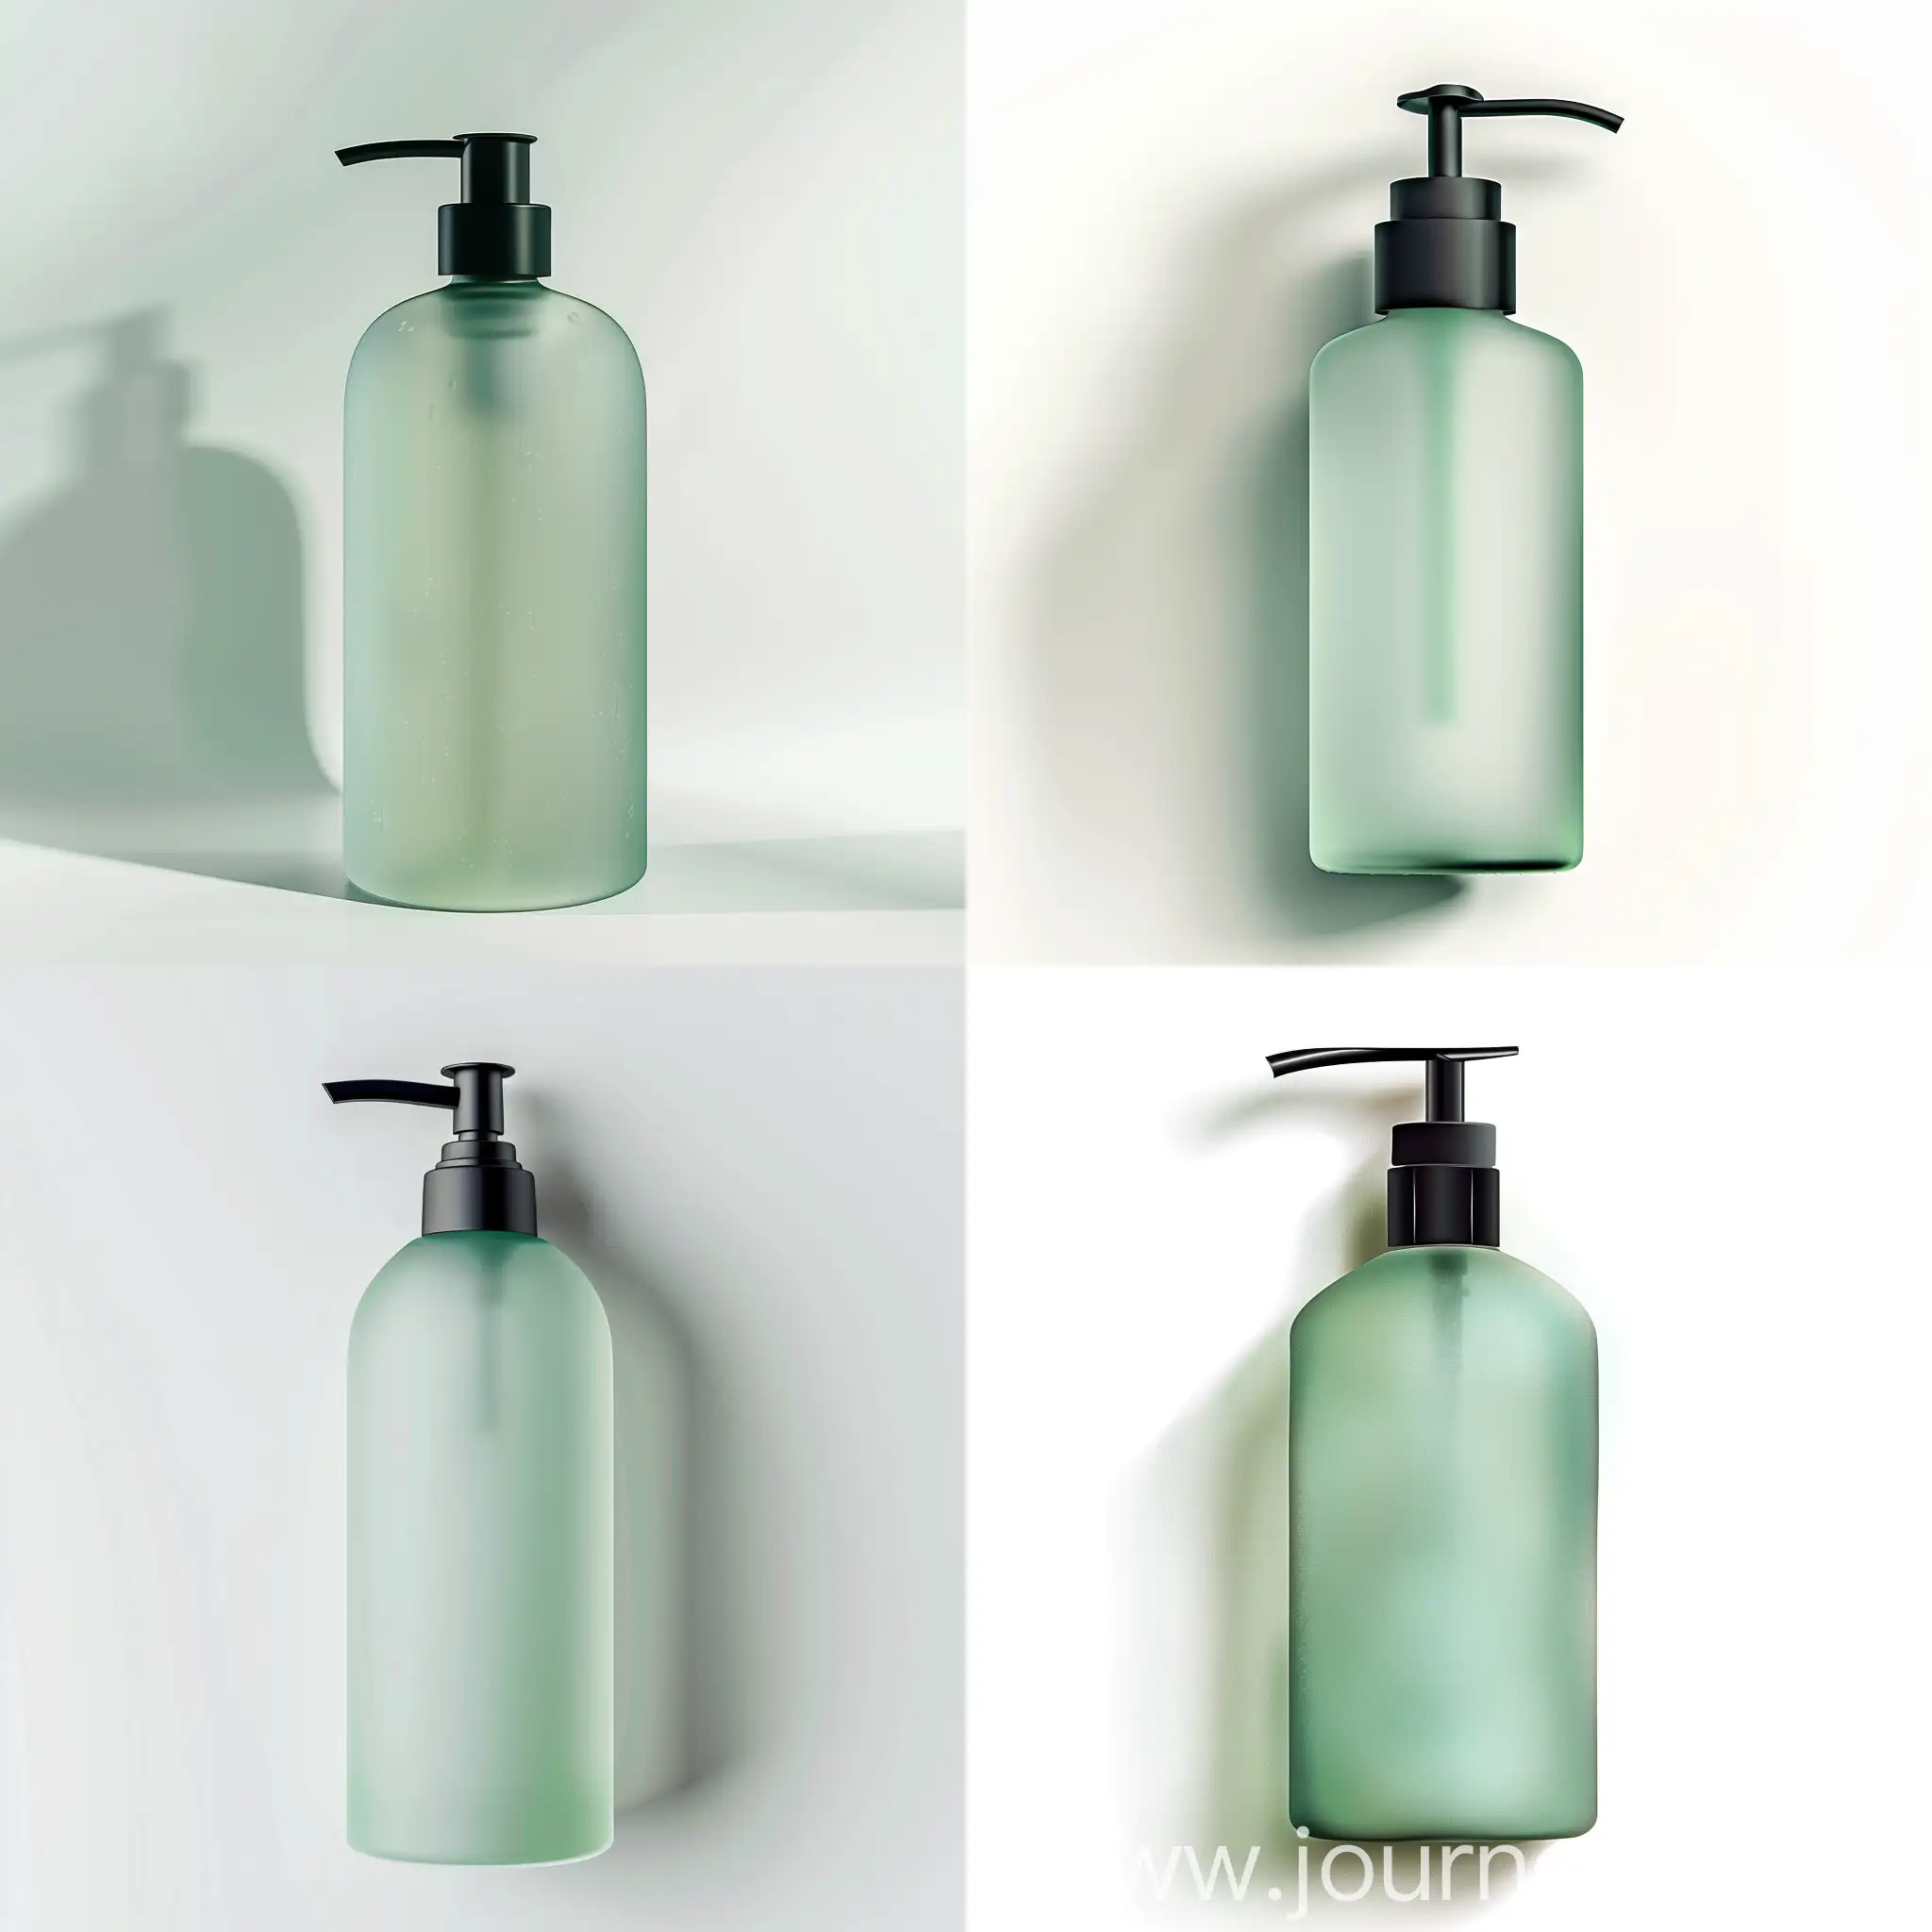 draw Shampoo bottle with black pump, frosted glass texture light green color on white background, front view, soft lighting, product photography style of minimalist design, ultra high definition, photorealistic ar 4:5
